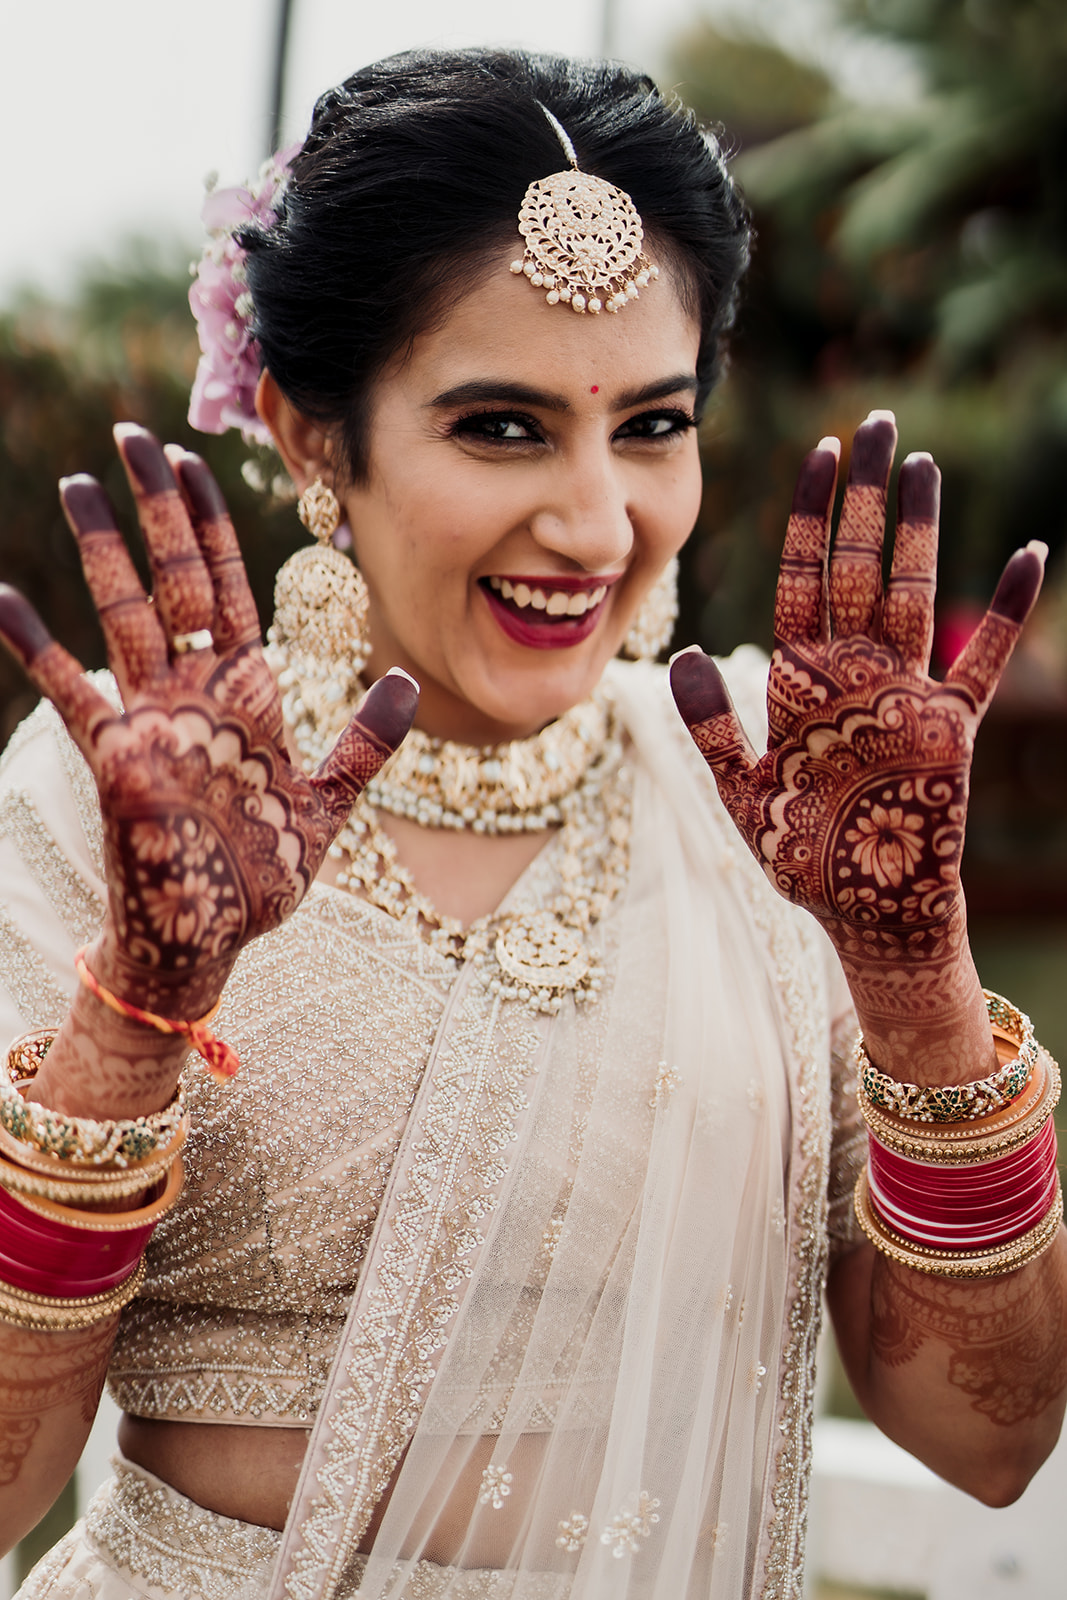 Artistic expression: The bride revels in the beauty of her mehendi stain, a testament to cultural tradition and bridal a